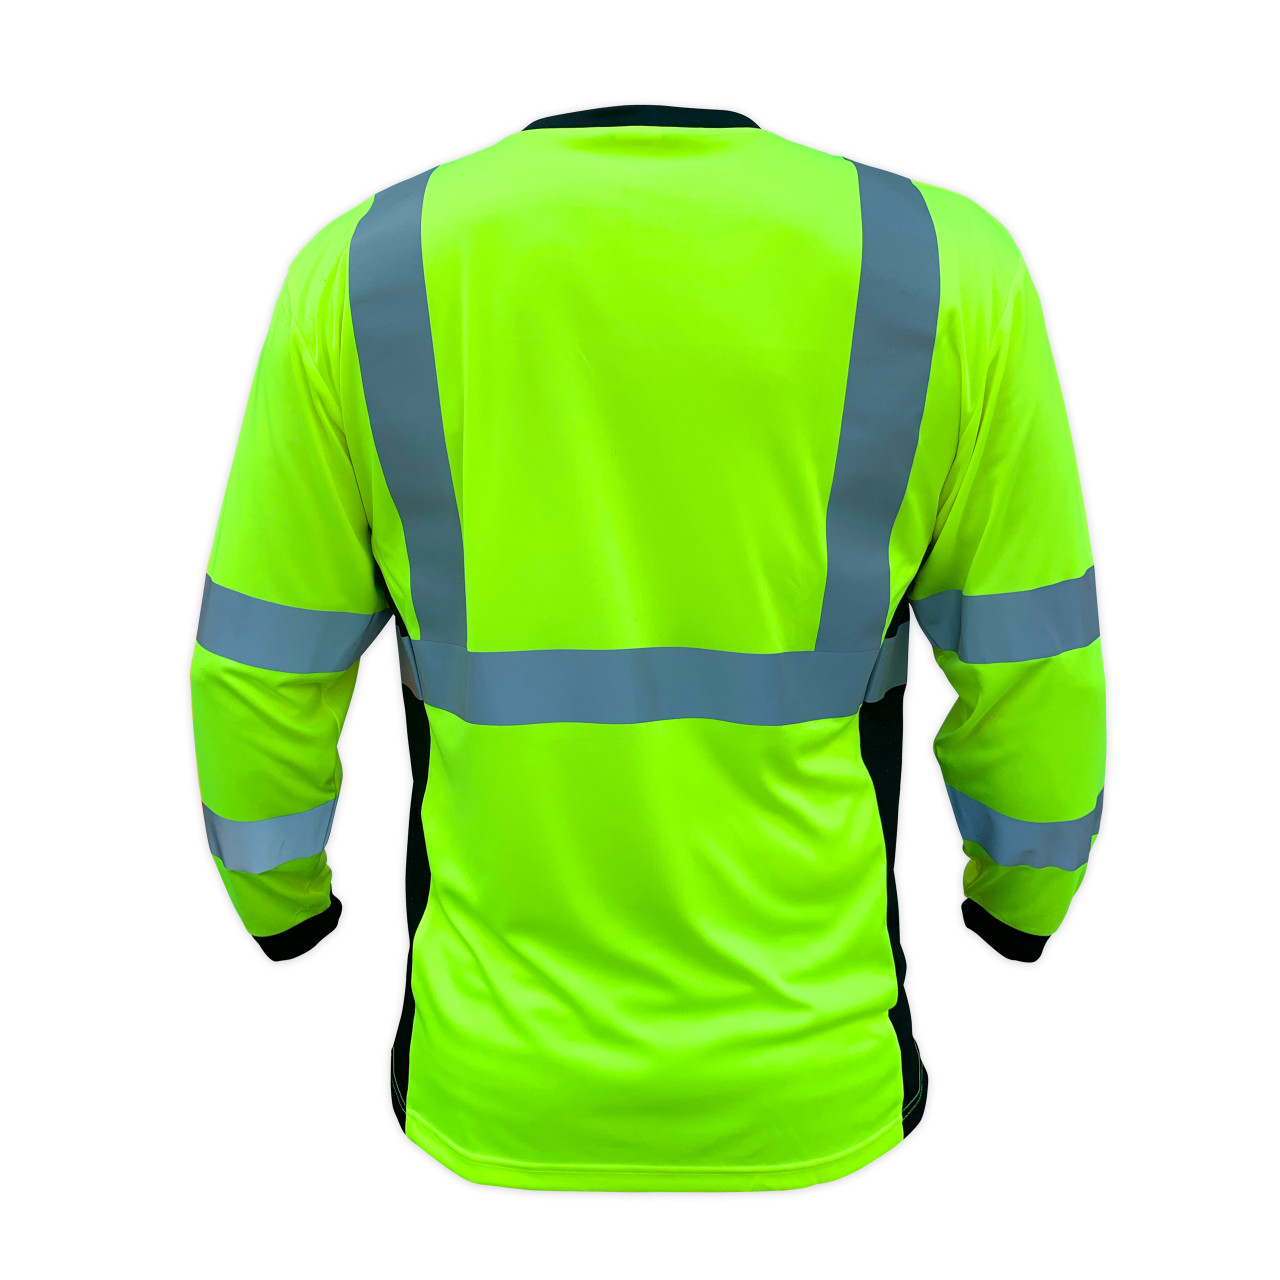 SS360º Basic Yellow (Safety Green) Long Sleeve Class 3 Type-R ...